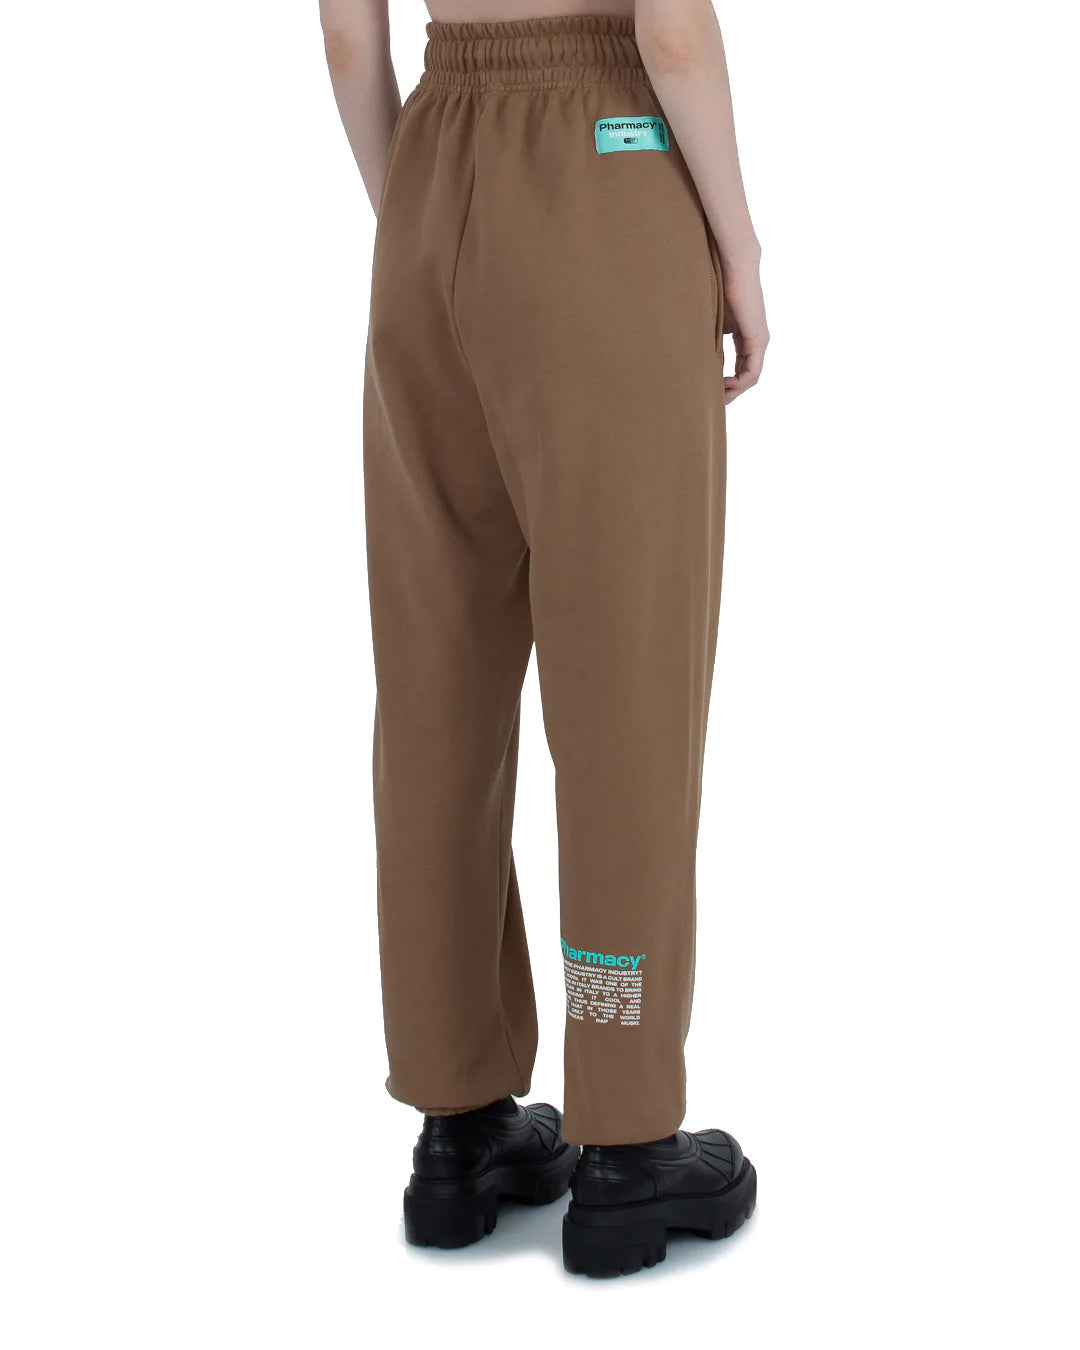 Pharmacy Industry Brown Cotton Jeans & Pant Brown, feed-1, Jeans & Pants - Women - Clothing, M, Pharmacy Industry, S, XS at SEYMAYKA